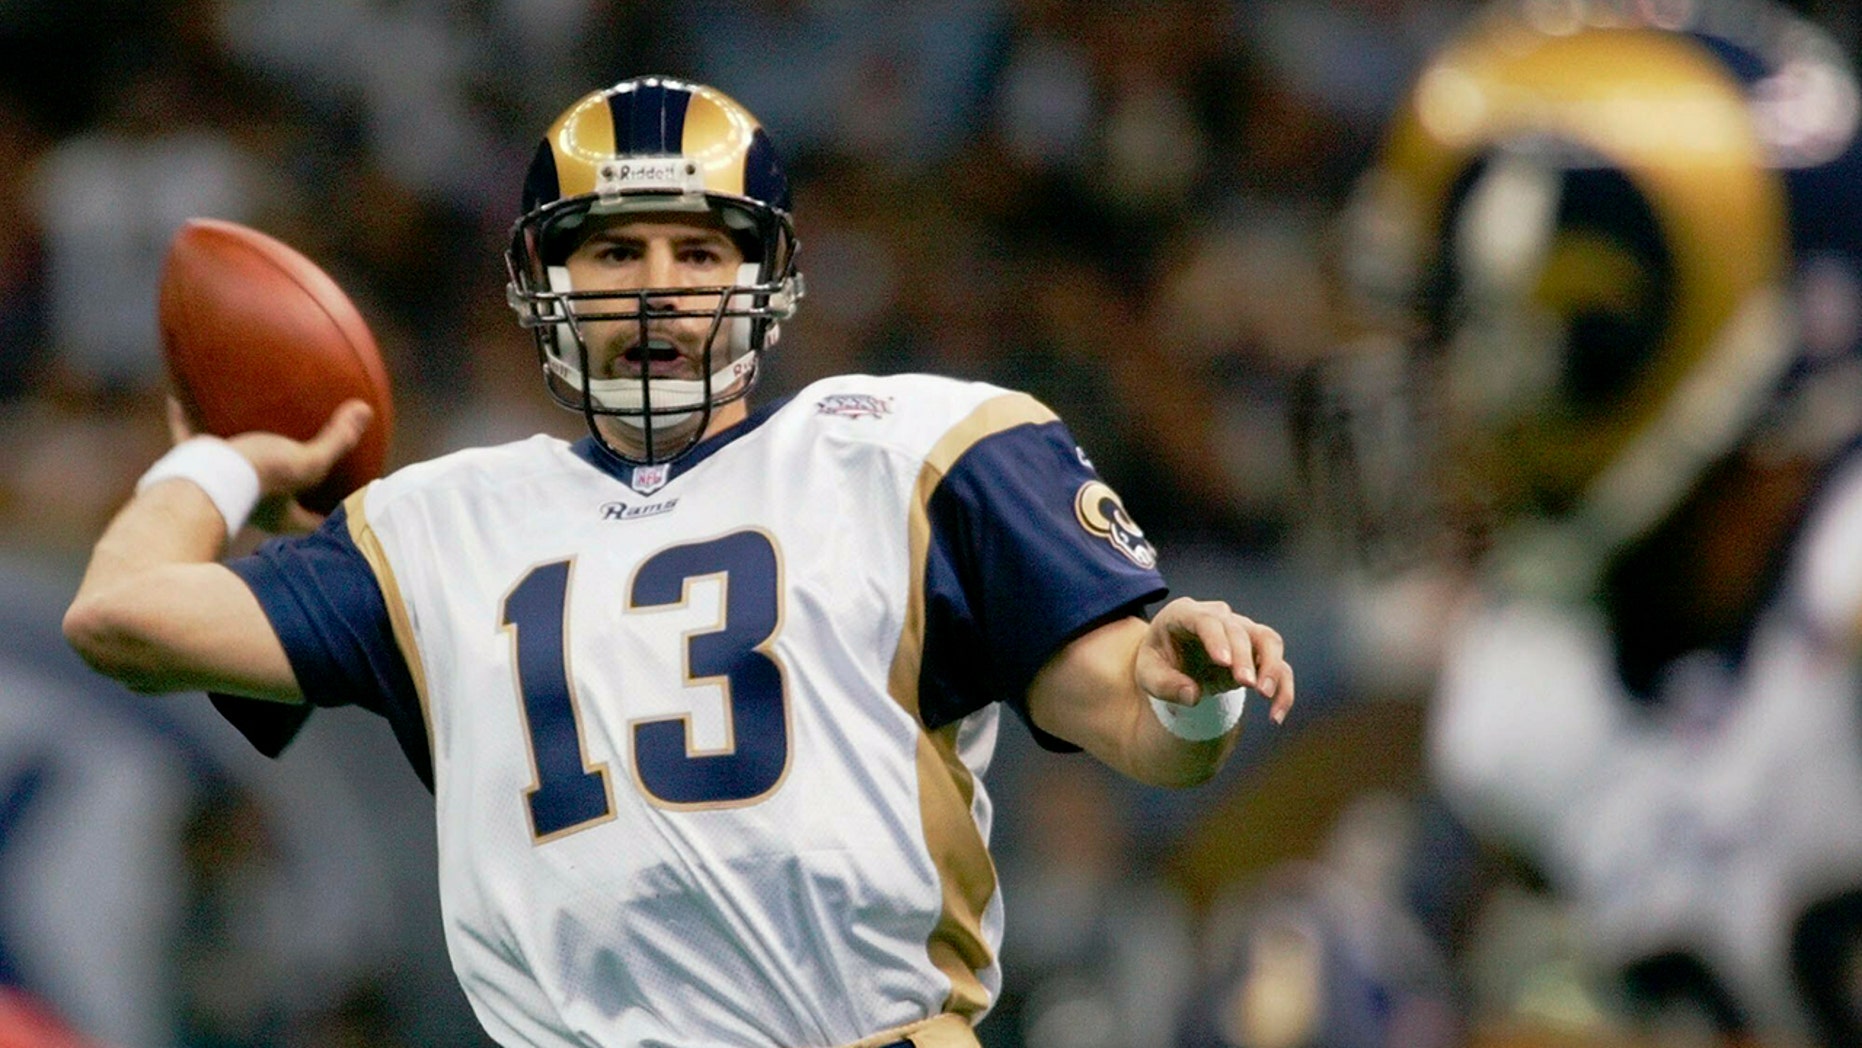 Super Bowl LIII role reversal could help Los Angeles Rams win, Hall of Fame quarterback says